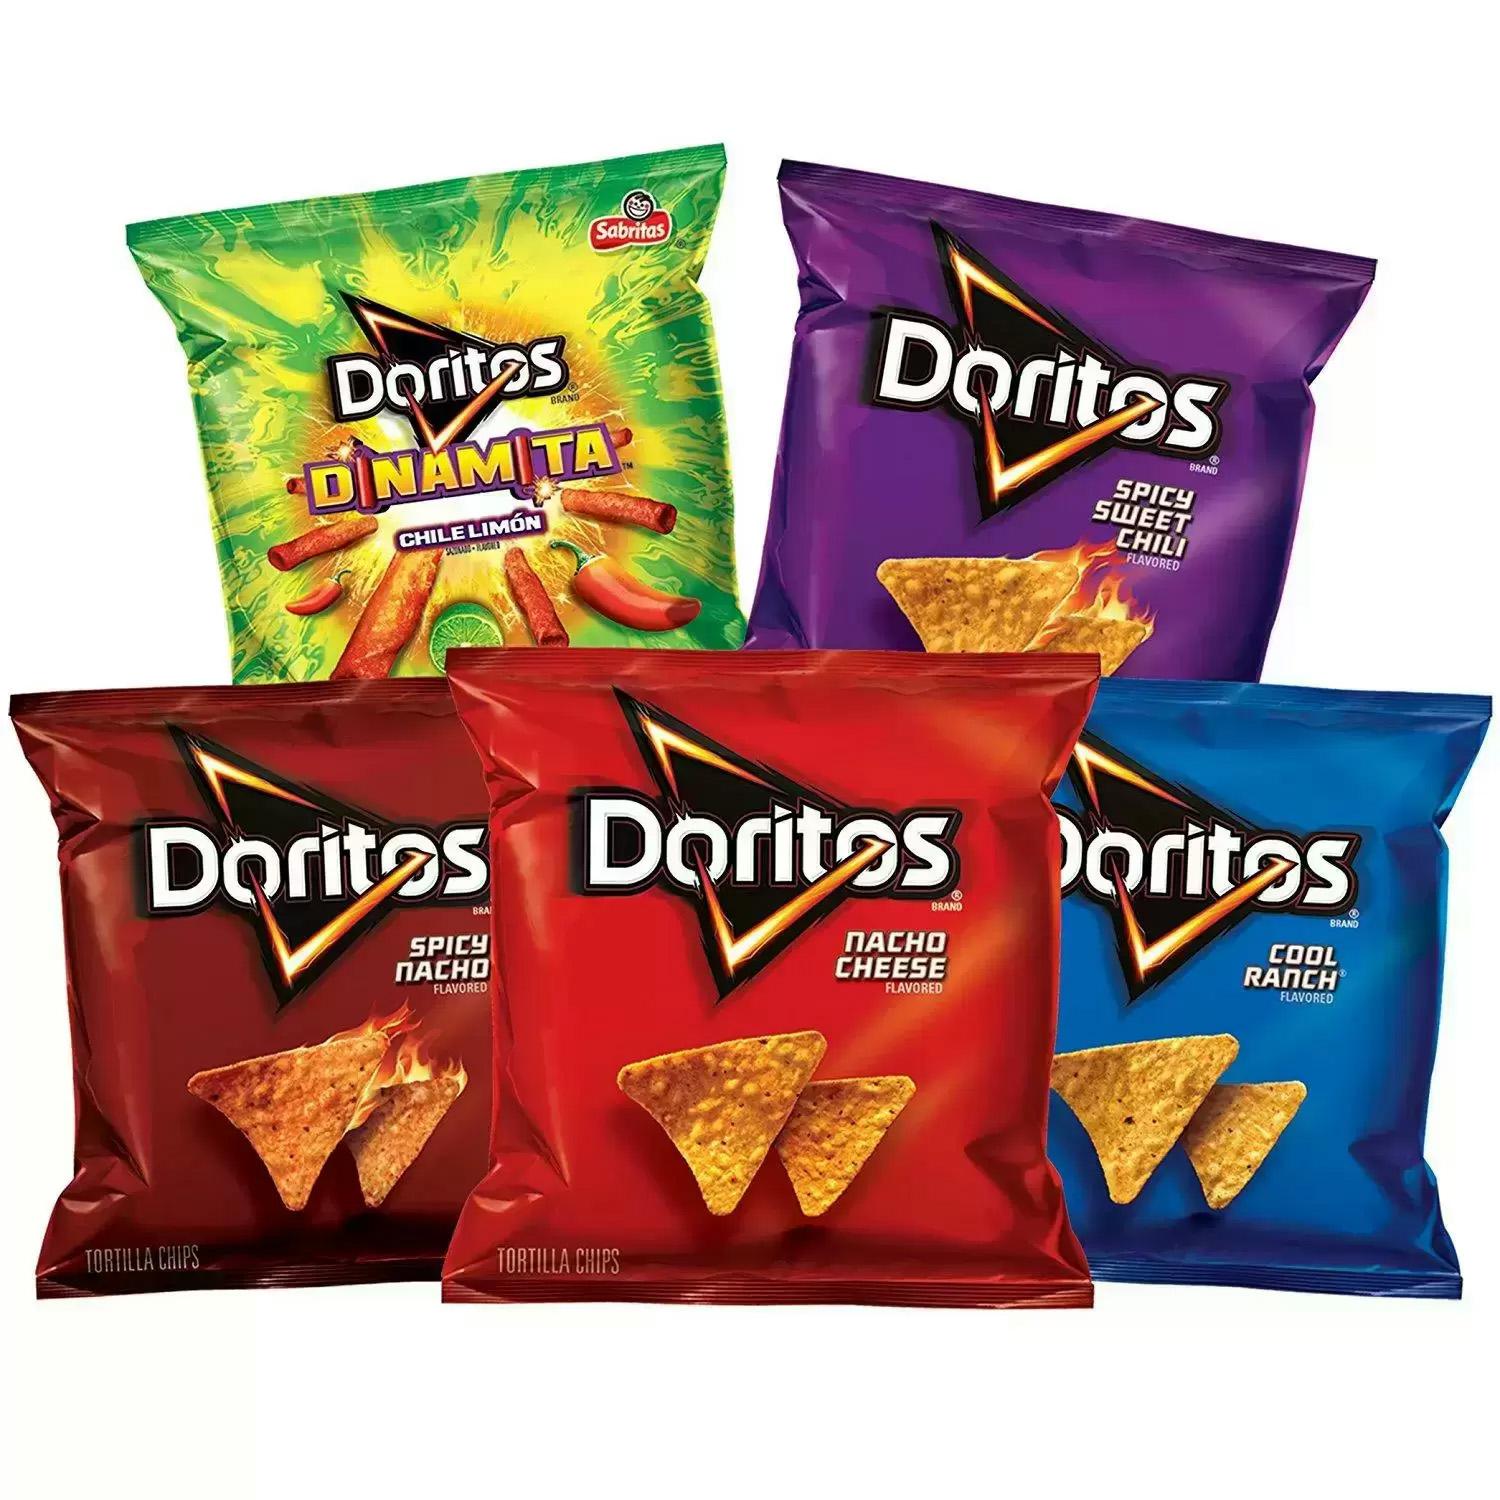 40 Doritos Flavored Tortilla Chip Variety Pack for $11.04 Shipped